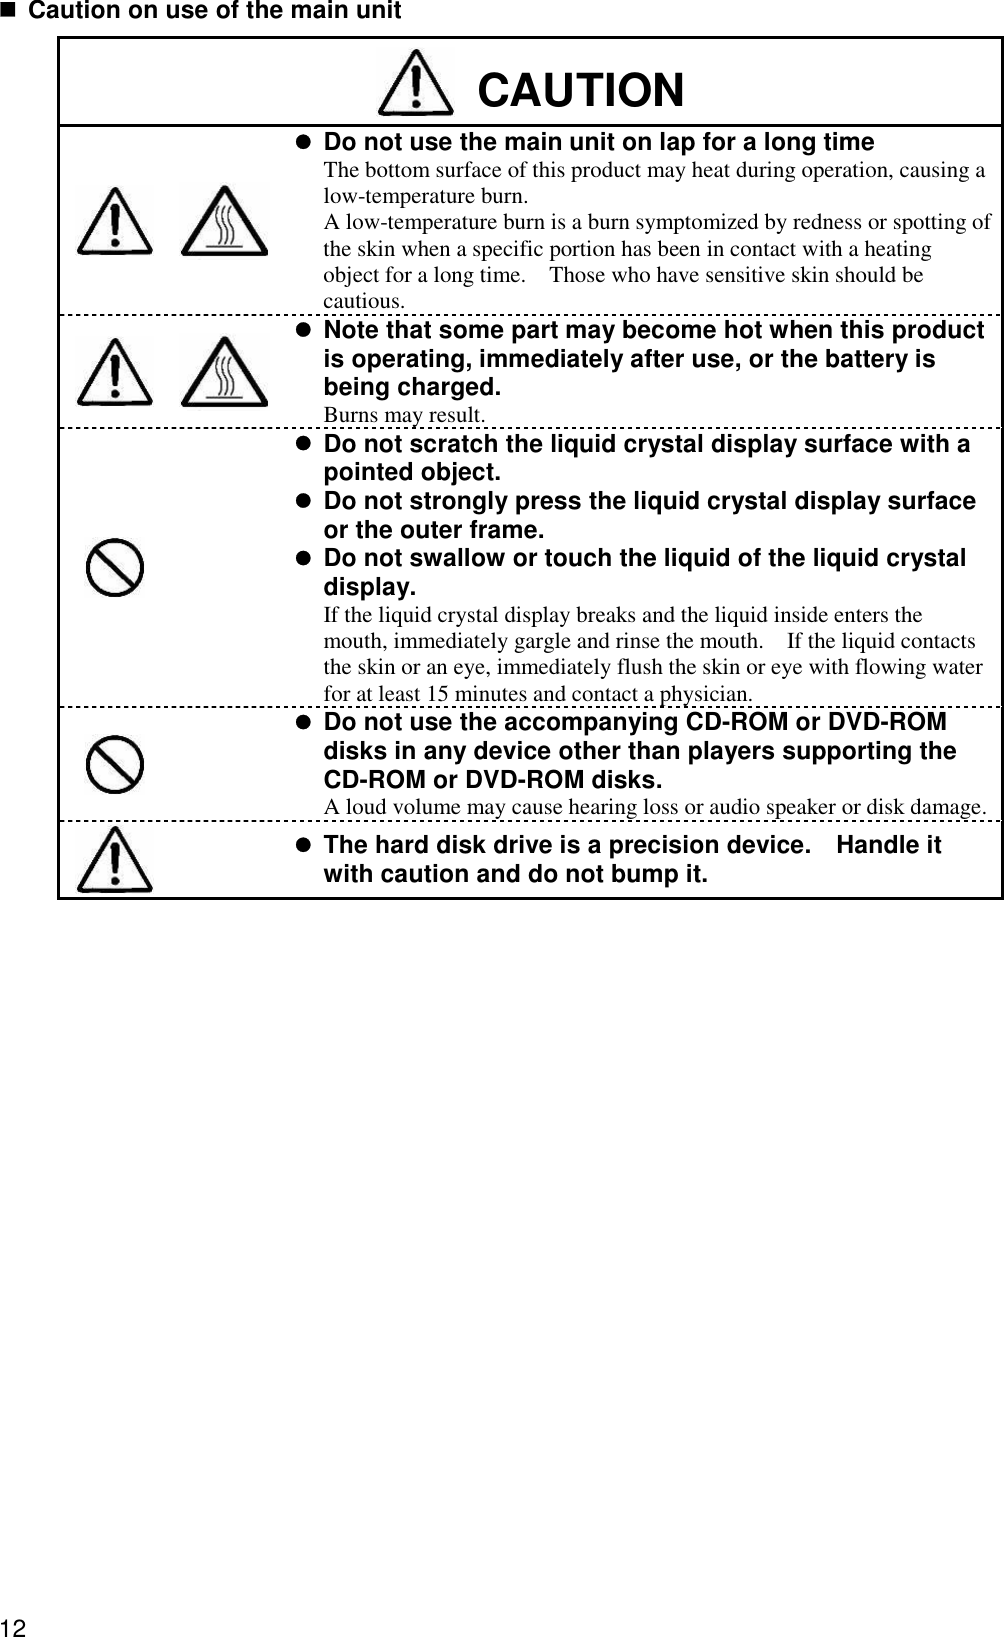 12  Caution on use of the main unit  CAUTION    Do not use the main unit on lap for a long time The bottom surface of this product may heat during operation, causing a low-temperature burn.   A low-temperature burn is a burn symptomized by redness or spotting of the skin when a specific portion has been in contact with a heating object for a long time.  Those who have sensitive skin should be cautious.    Note that some part may become hot when this product is operating, immediately after use, or the battery is being charged. Burns may result.      Do not scratch the liquid crystal display surface with a pointed object.  Do not strongly press the liquid crystal display surface or the outer frame.  Do not swallow or touch the liquid of the liquid crystal display. If the liquid crystal display breaks and the liquid inside enters the mouth, immediately gargle and rinse the mouth.  If the liquid contacts the skin or an eye, immediately flush the skin or eye with flowing water for at least 15 minutes and contact a physician.    Do not use the accompanying CD-ROM or DVD-ROM disks in any device other than players supporting the CD-ROM or DVD-ROM disks. A loud volume may cause hearing loss or audio speaker or disk damage.       The hard disk drive is a precision device.  Handle it with caution and do not bump it.     